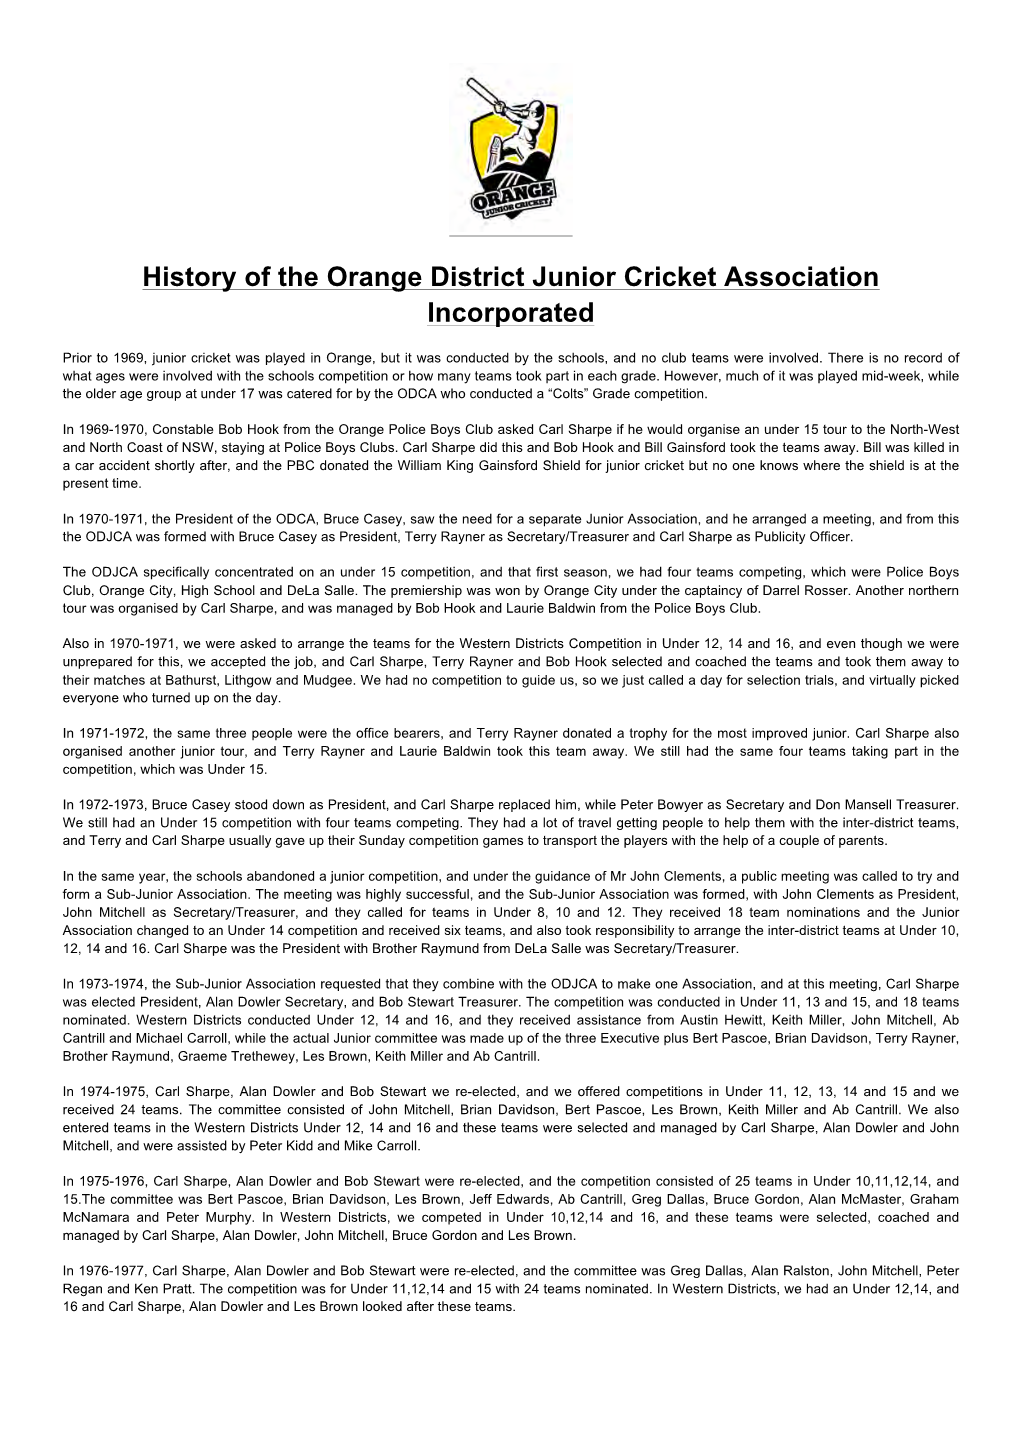 History of the Orange District Junior Cricket Association Incorporated